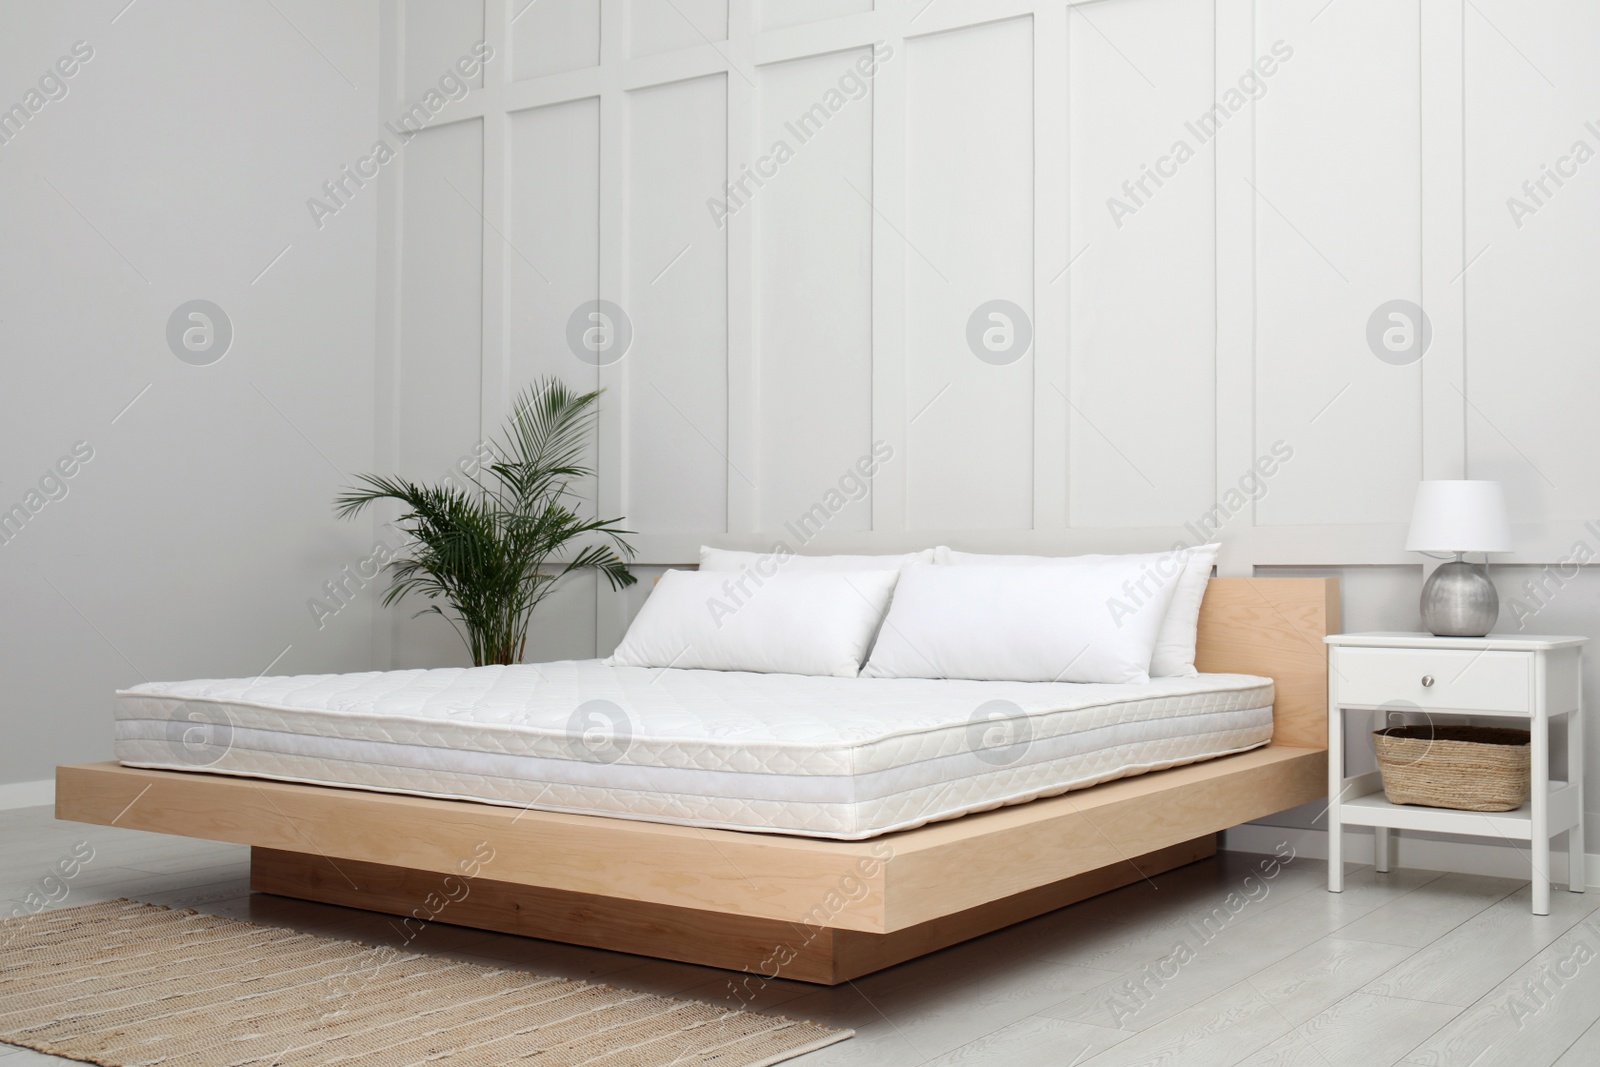 Photo of Wooden bed with soft white mattress and pillows in cozy room interior